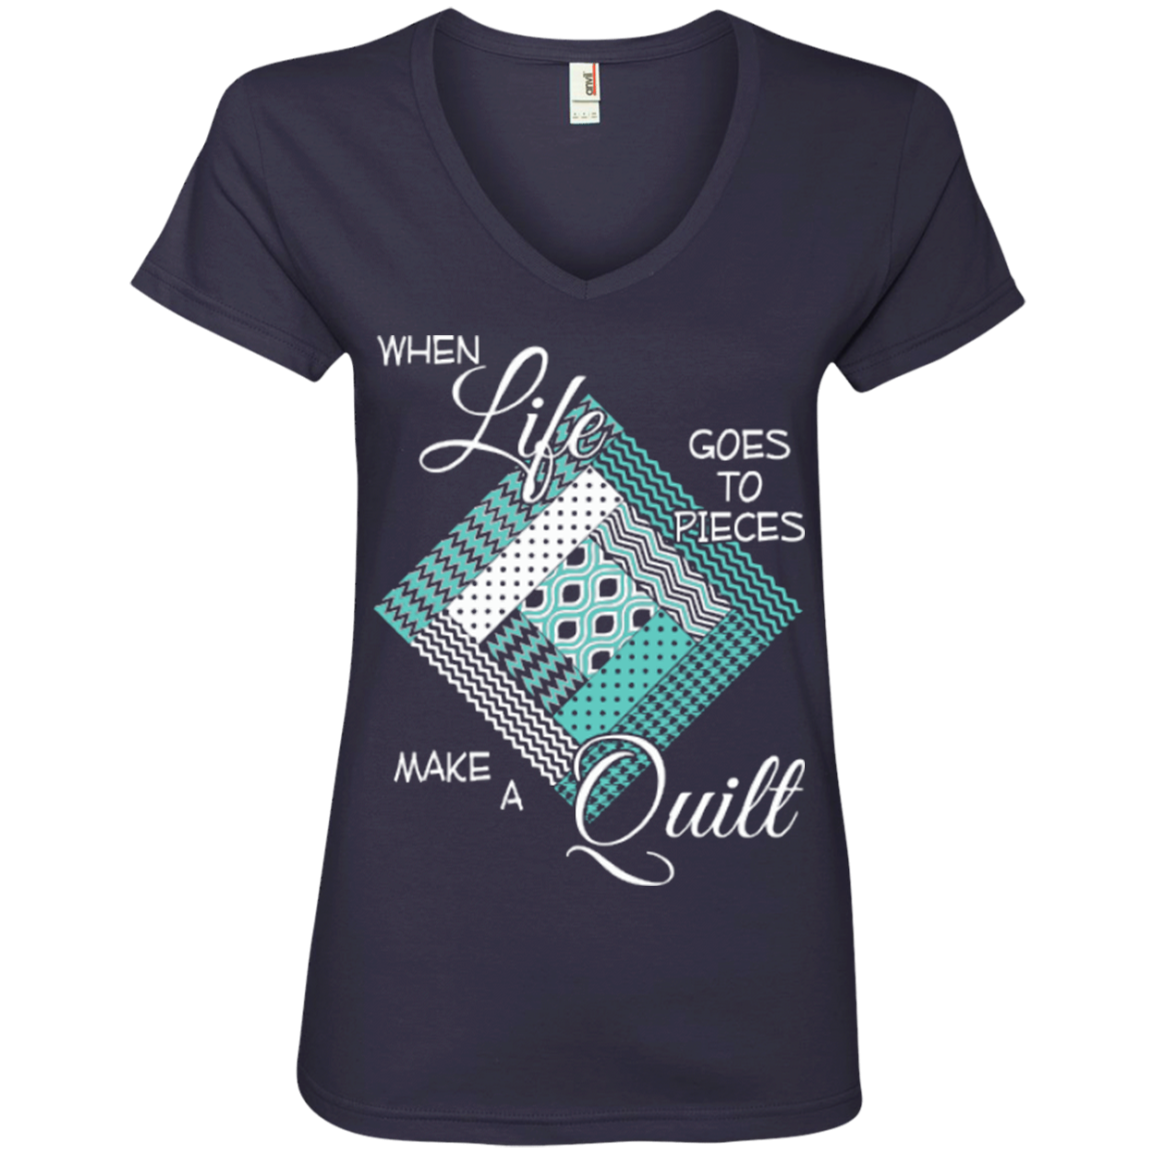 Make a Quilt (turquoise) Ladies V-Neck Tee - Crafter4Life - 4